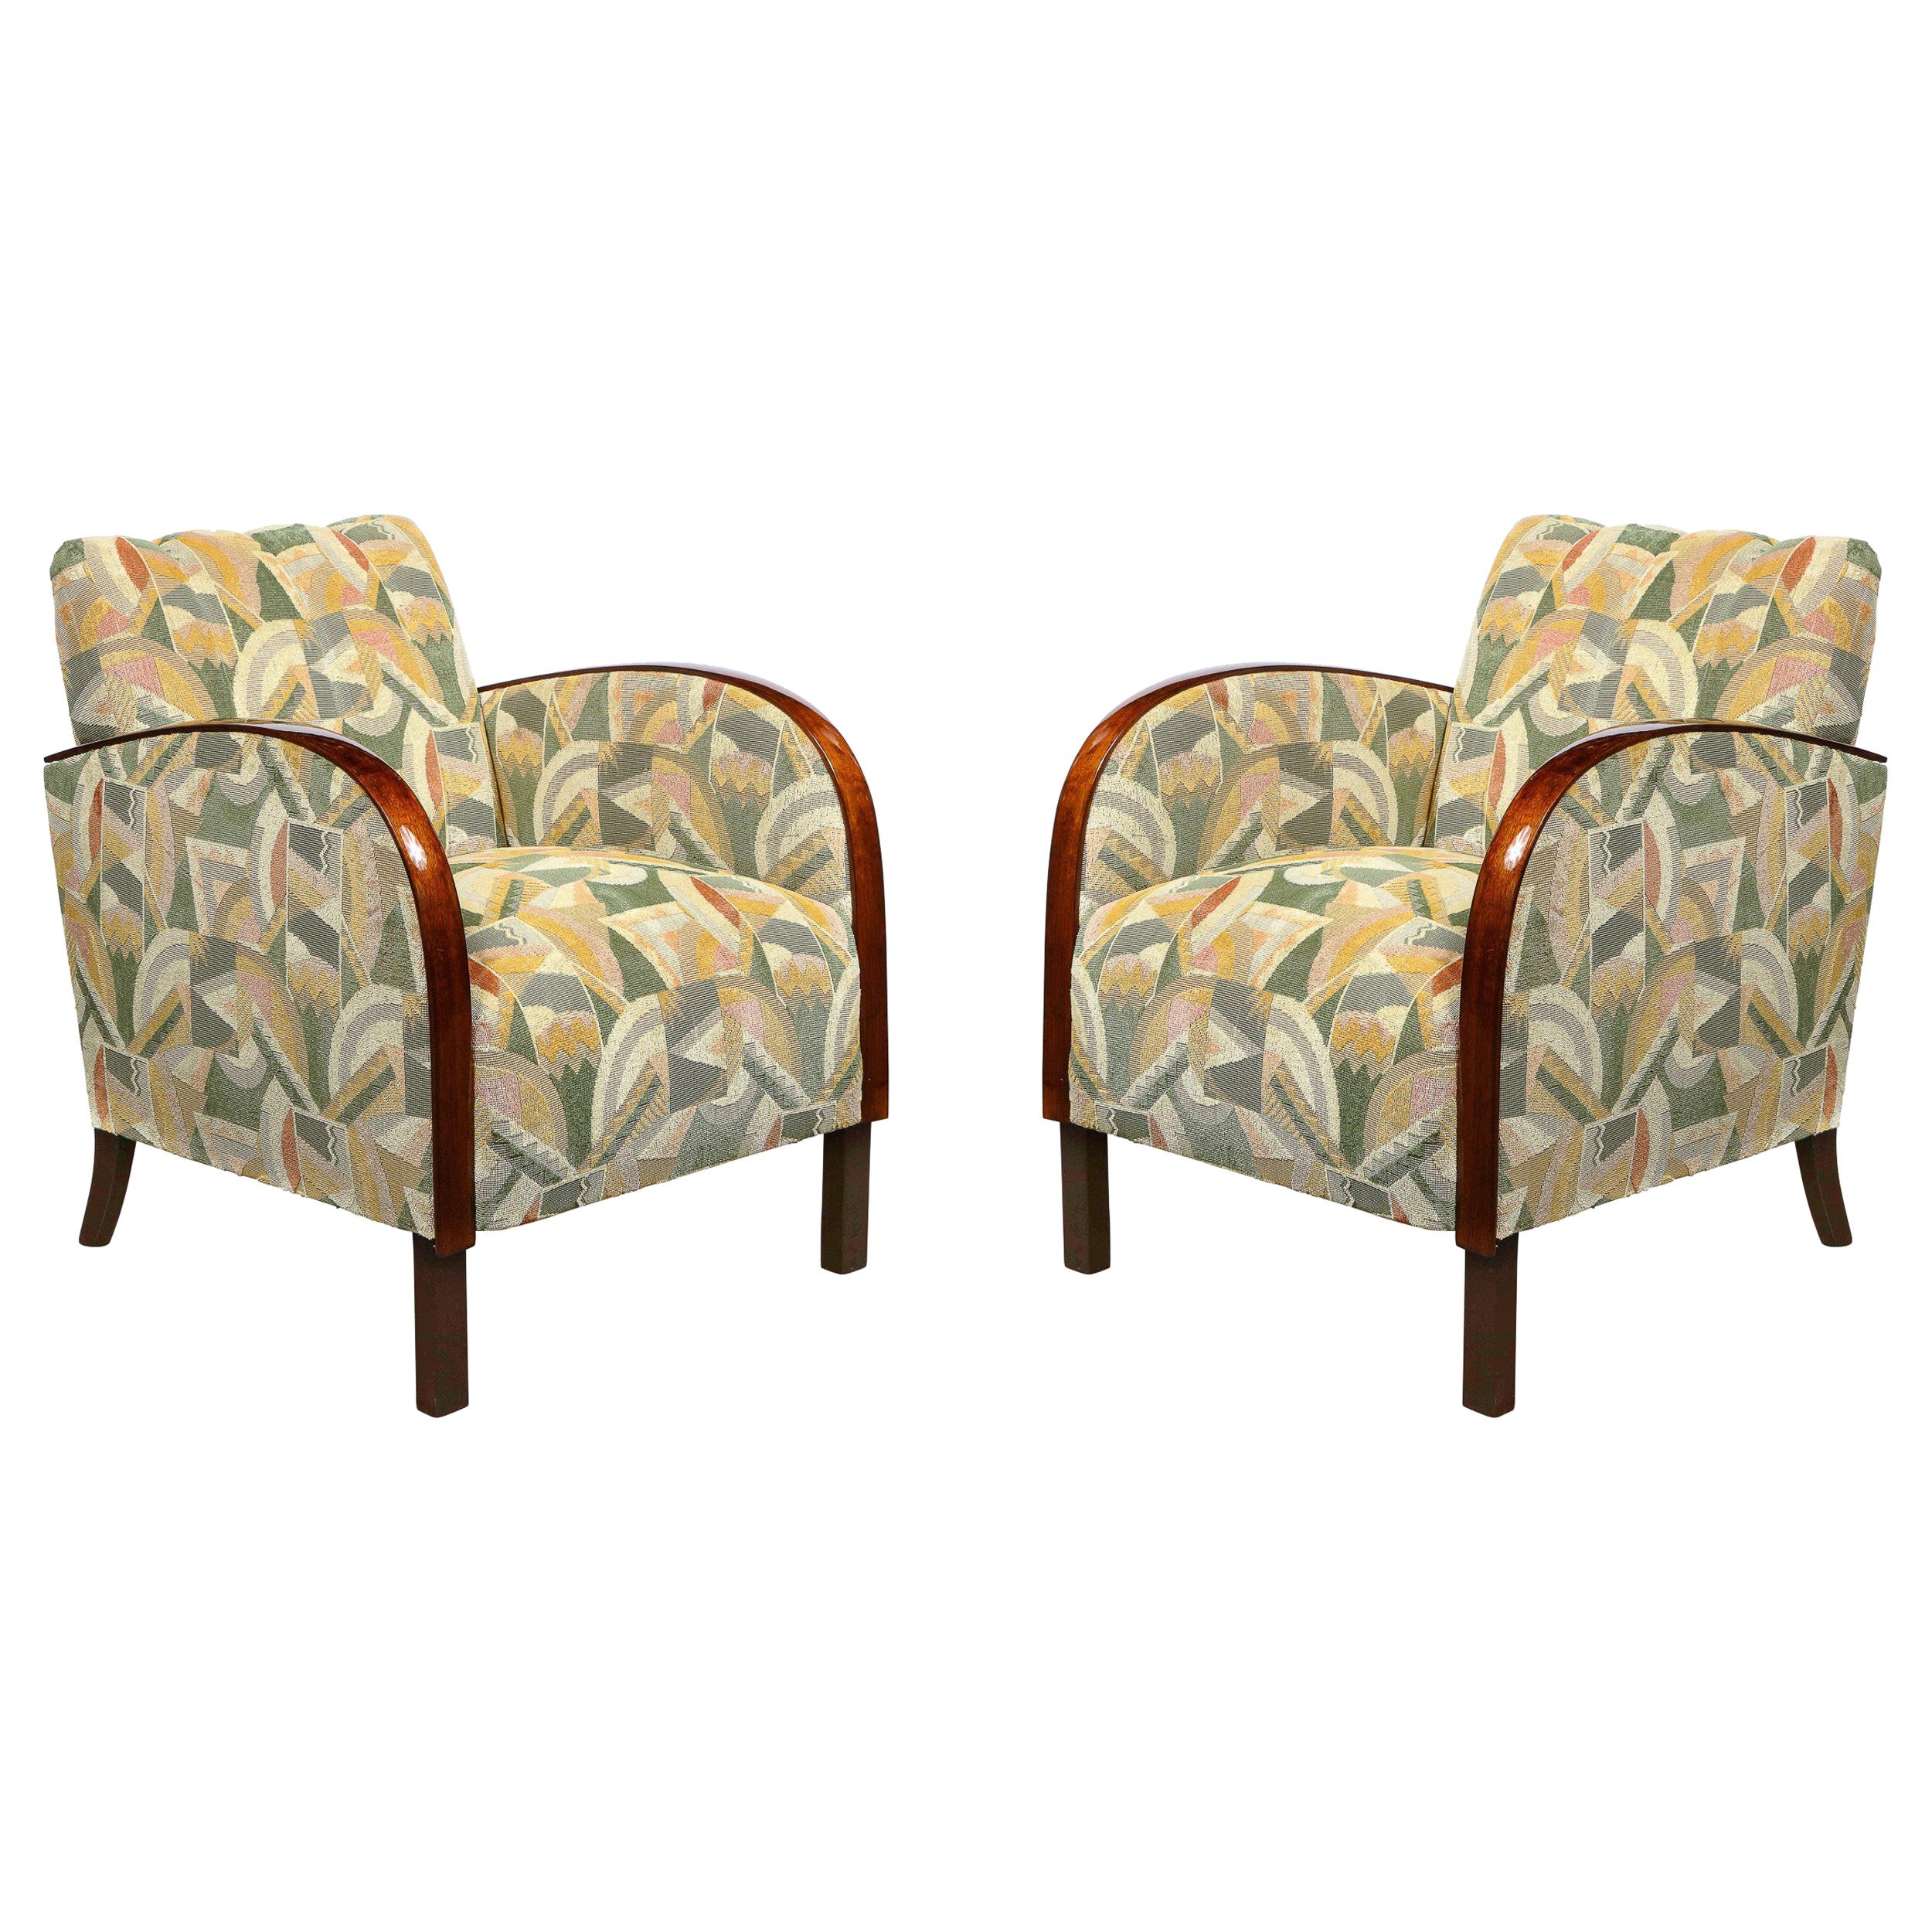 Pair of Art Deco Streamlined Walnut Club Chairs in Cubist Clarence House Fabric